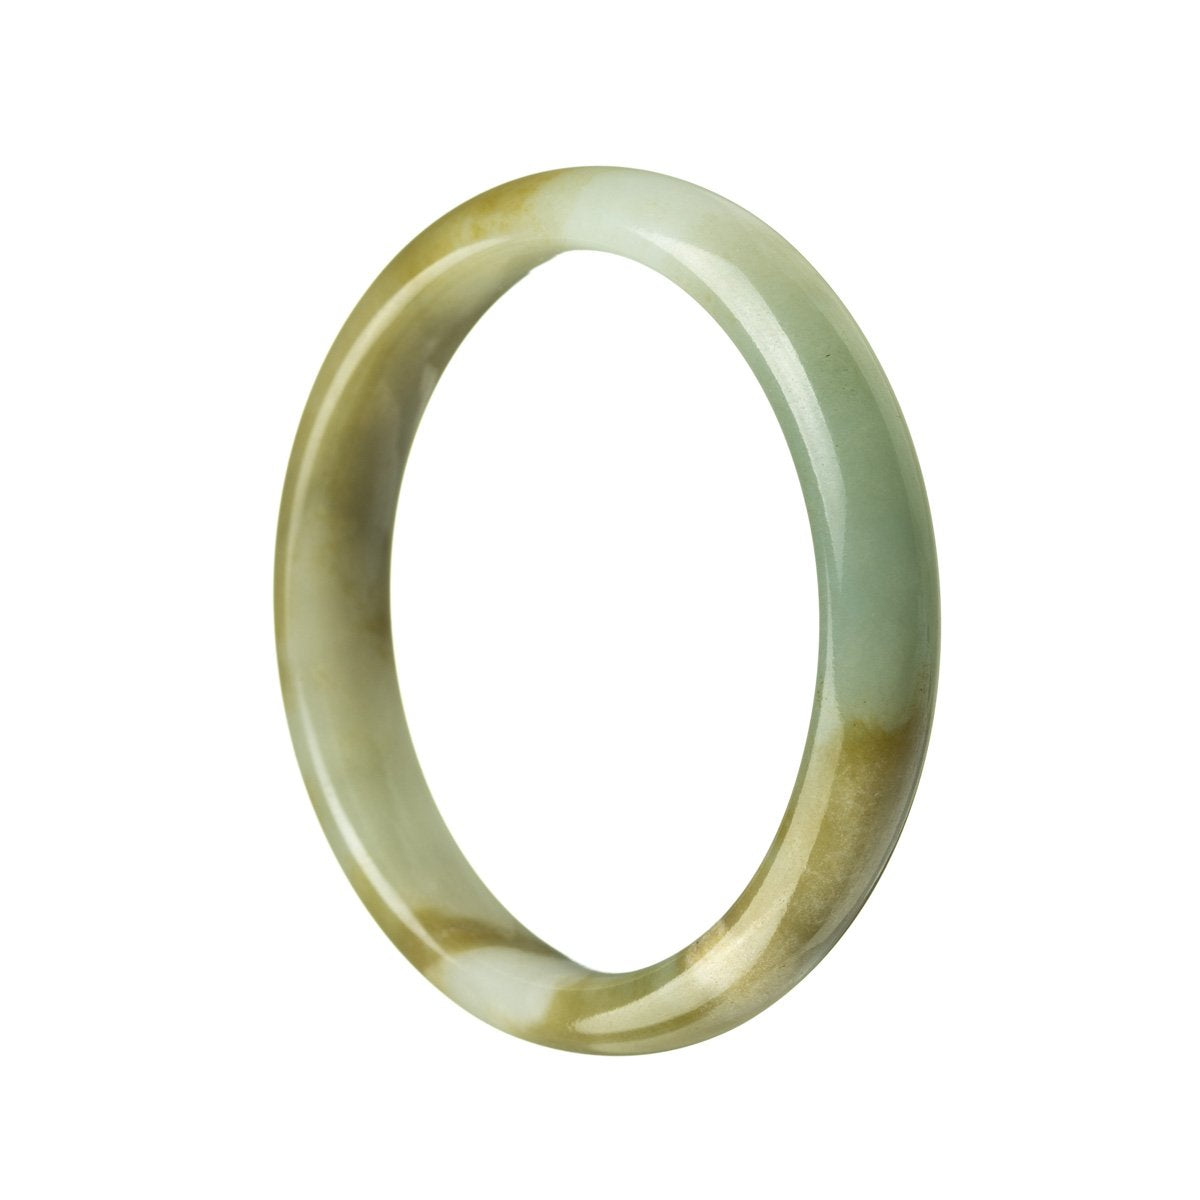 An image of a beautiful green and brown jade bangle, featuring a traditional design. The bangle has a semi-round shape and a diameter of 56mm. It is made from authentic grade A jade and is sold by MAYS.